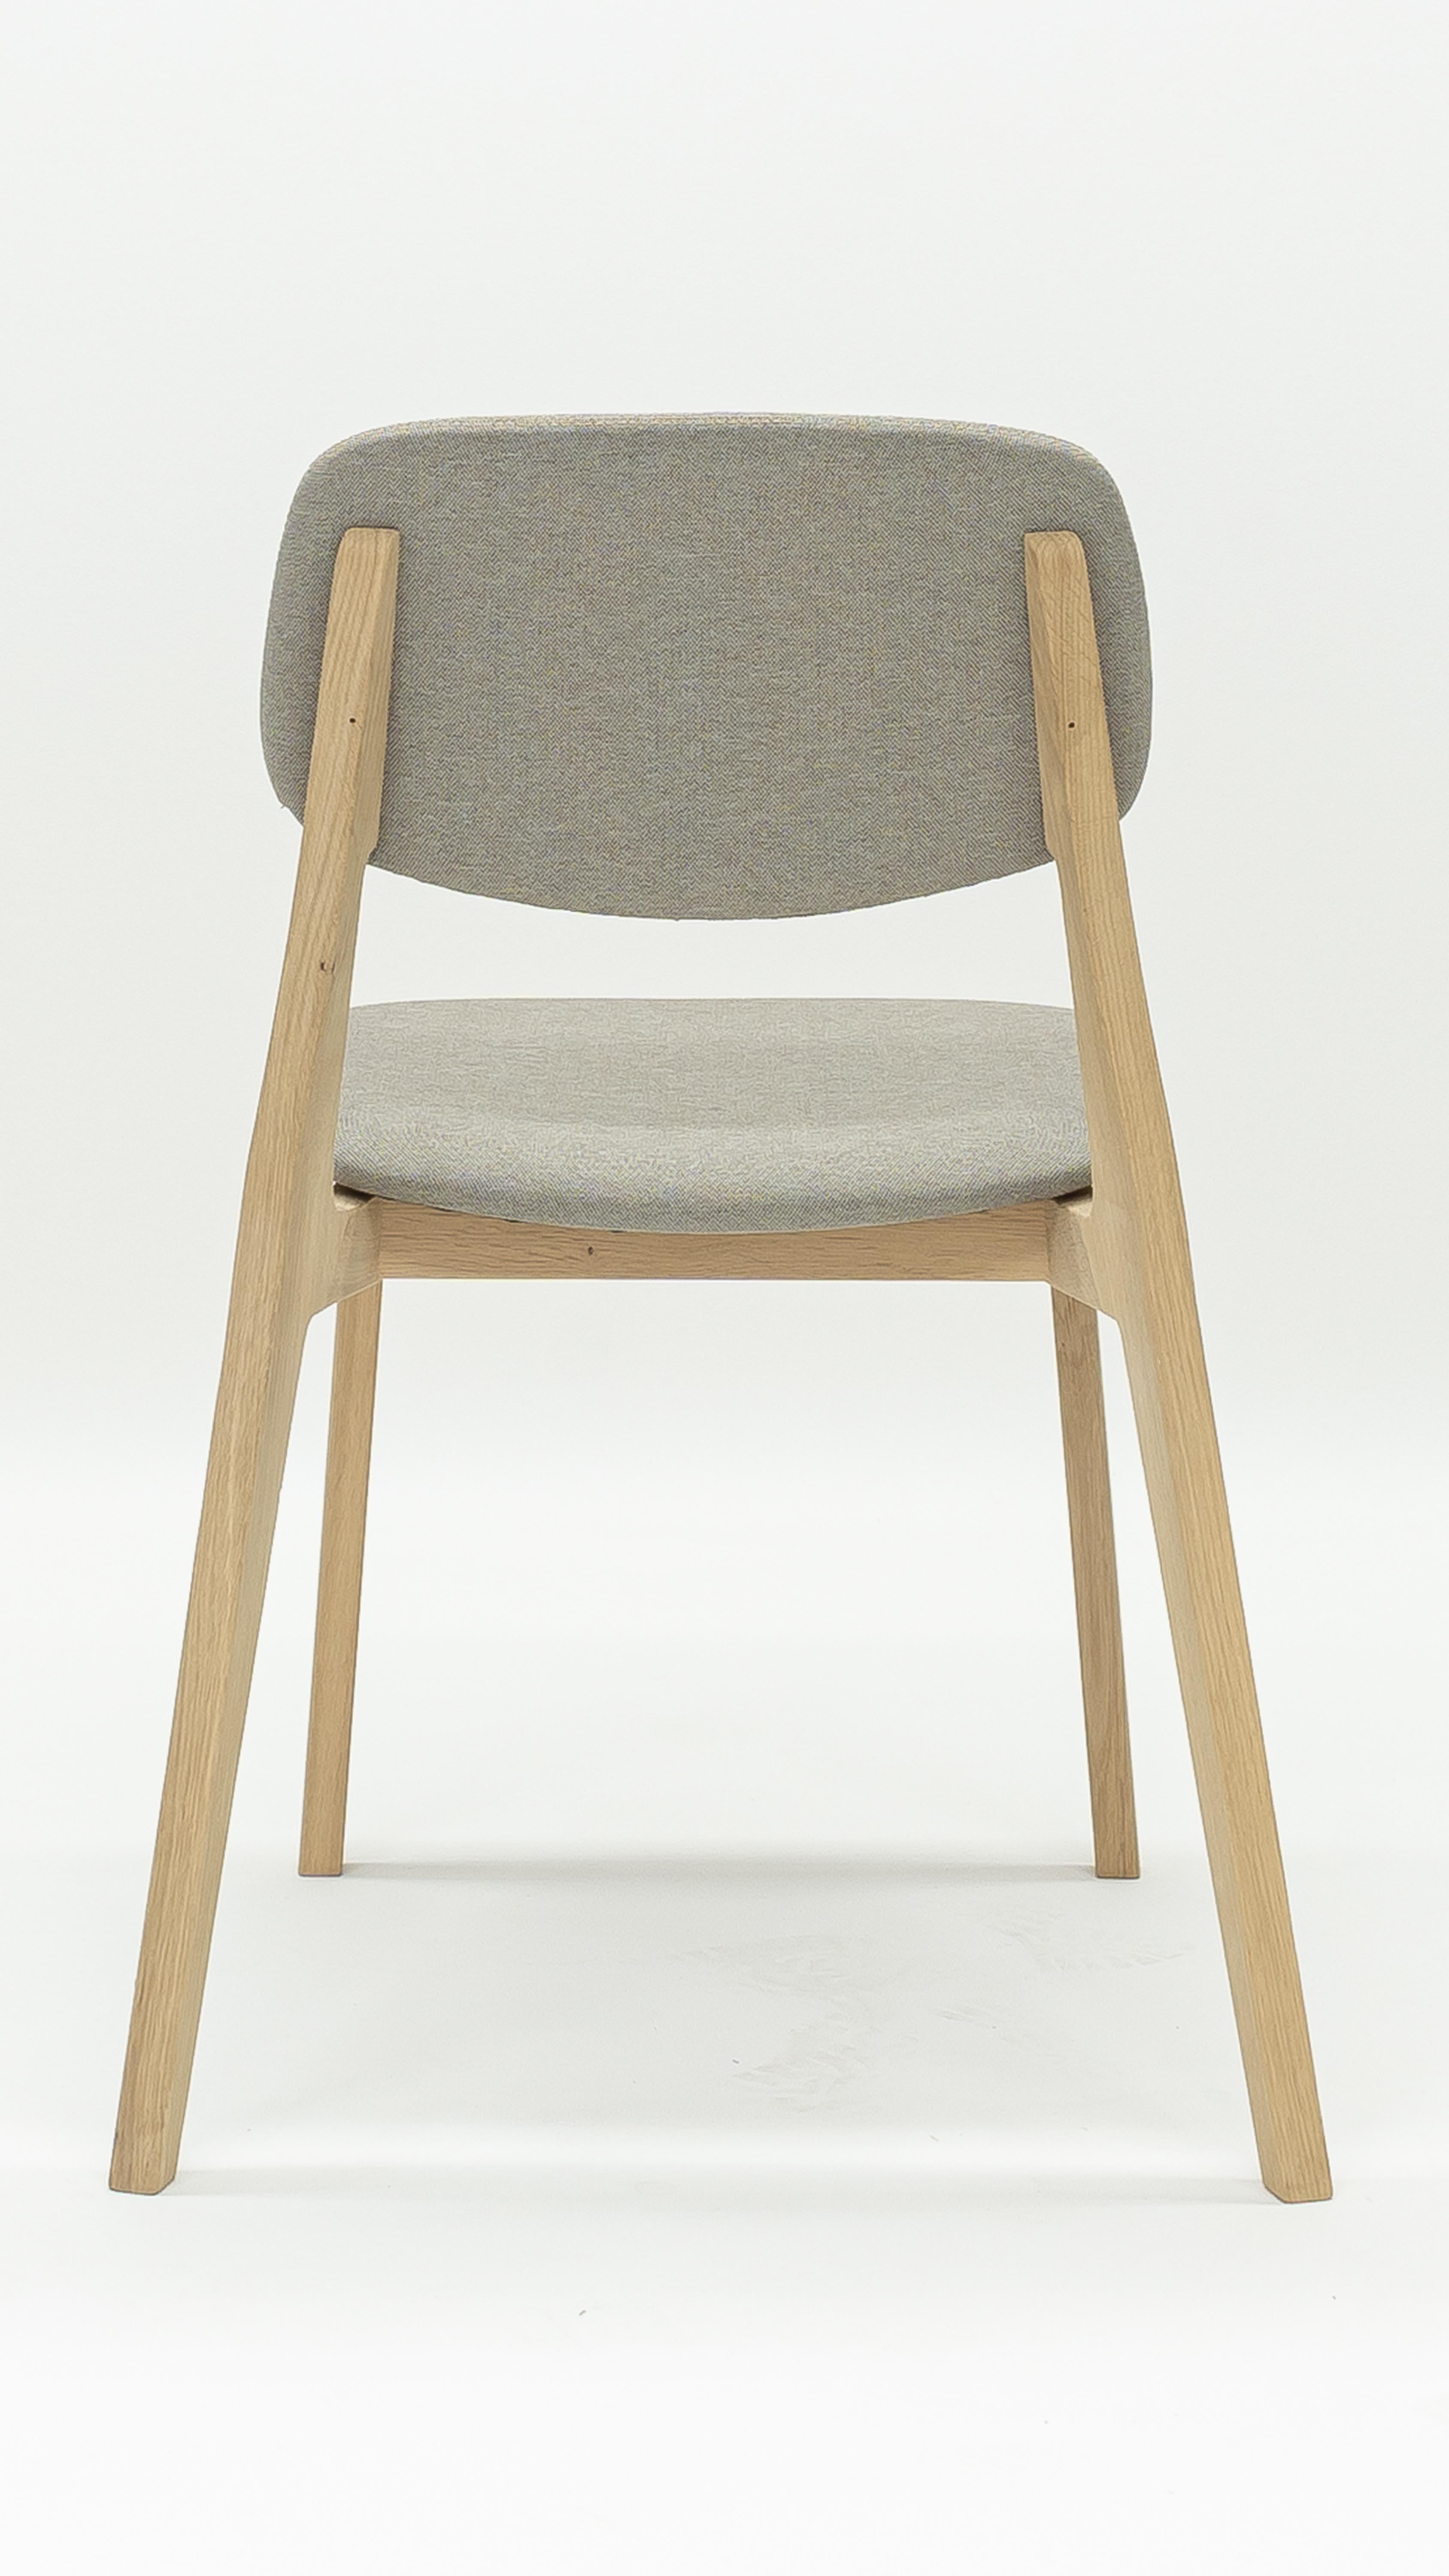 Mid-Century Modern Felber C14 Wood Chairs by Dietiker, Upholstered Beige, Set of 2 For Sale